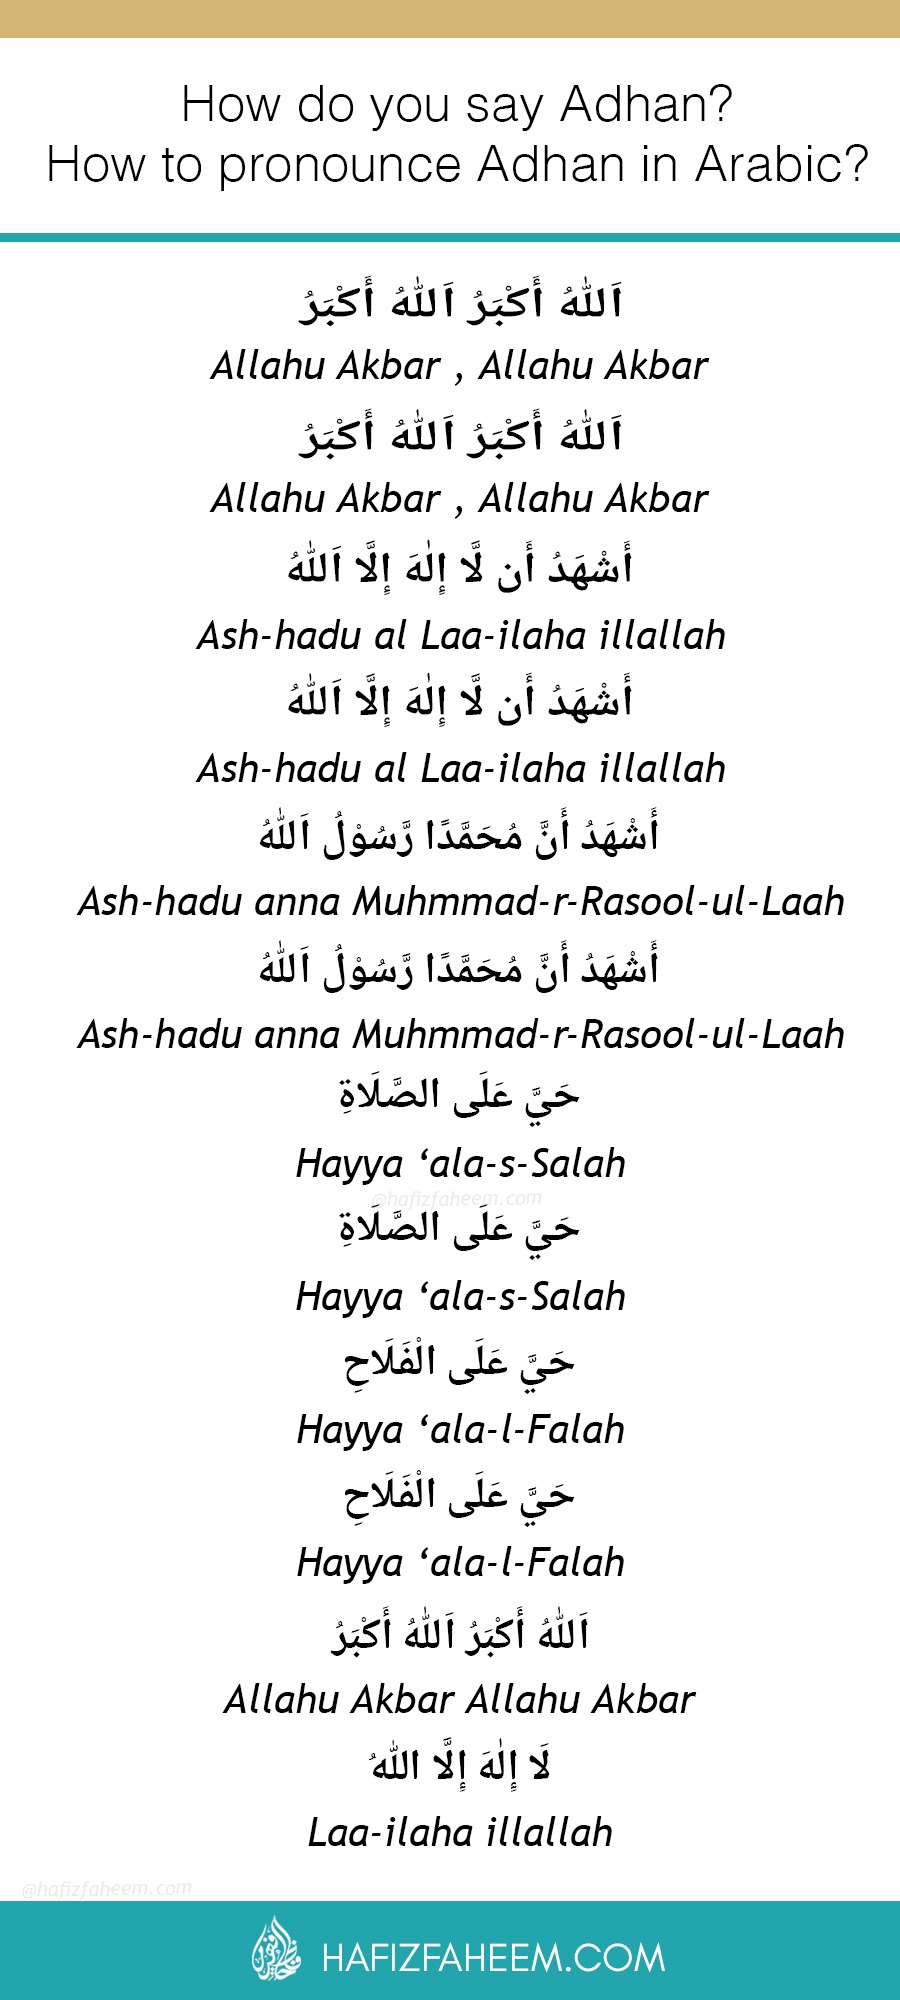 how do you say Adhan - How to pronunce Adhan? - Adhan words - Athan